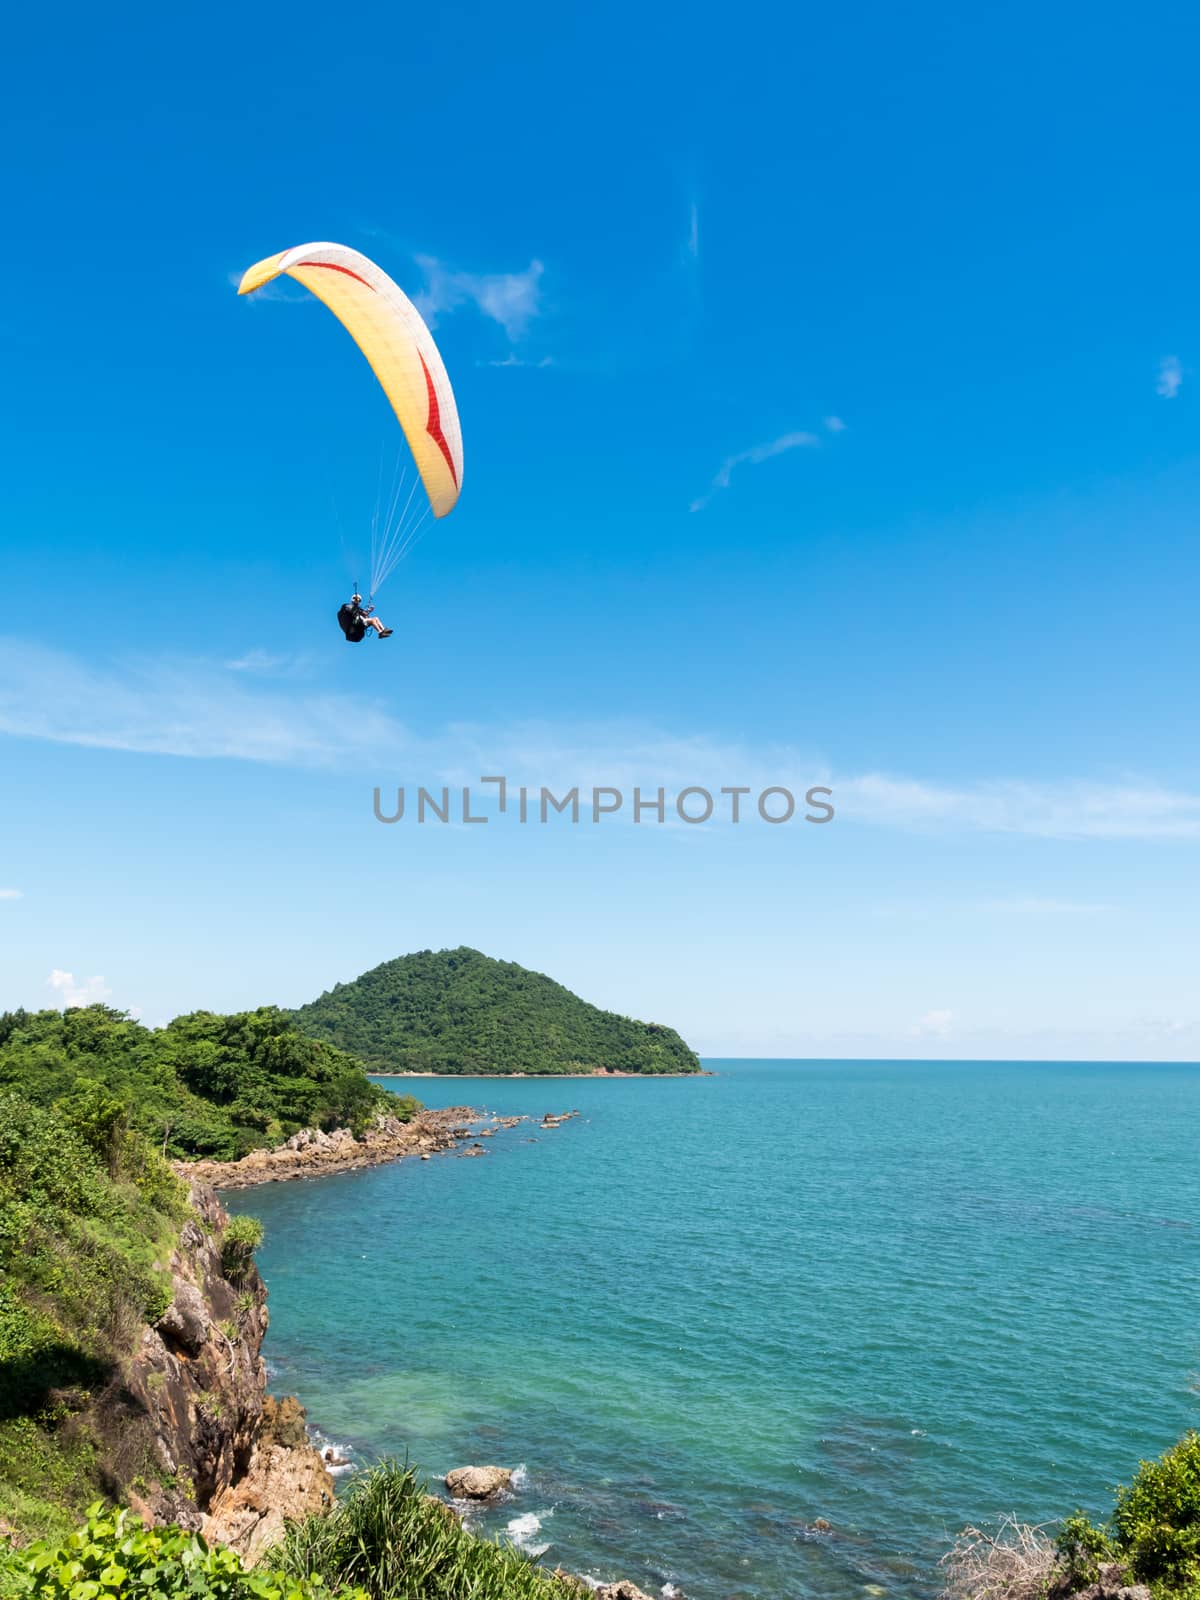 Beautiful seascape with Paraglider flying in blue sky.